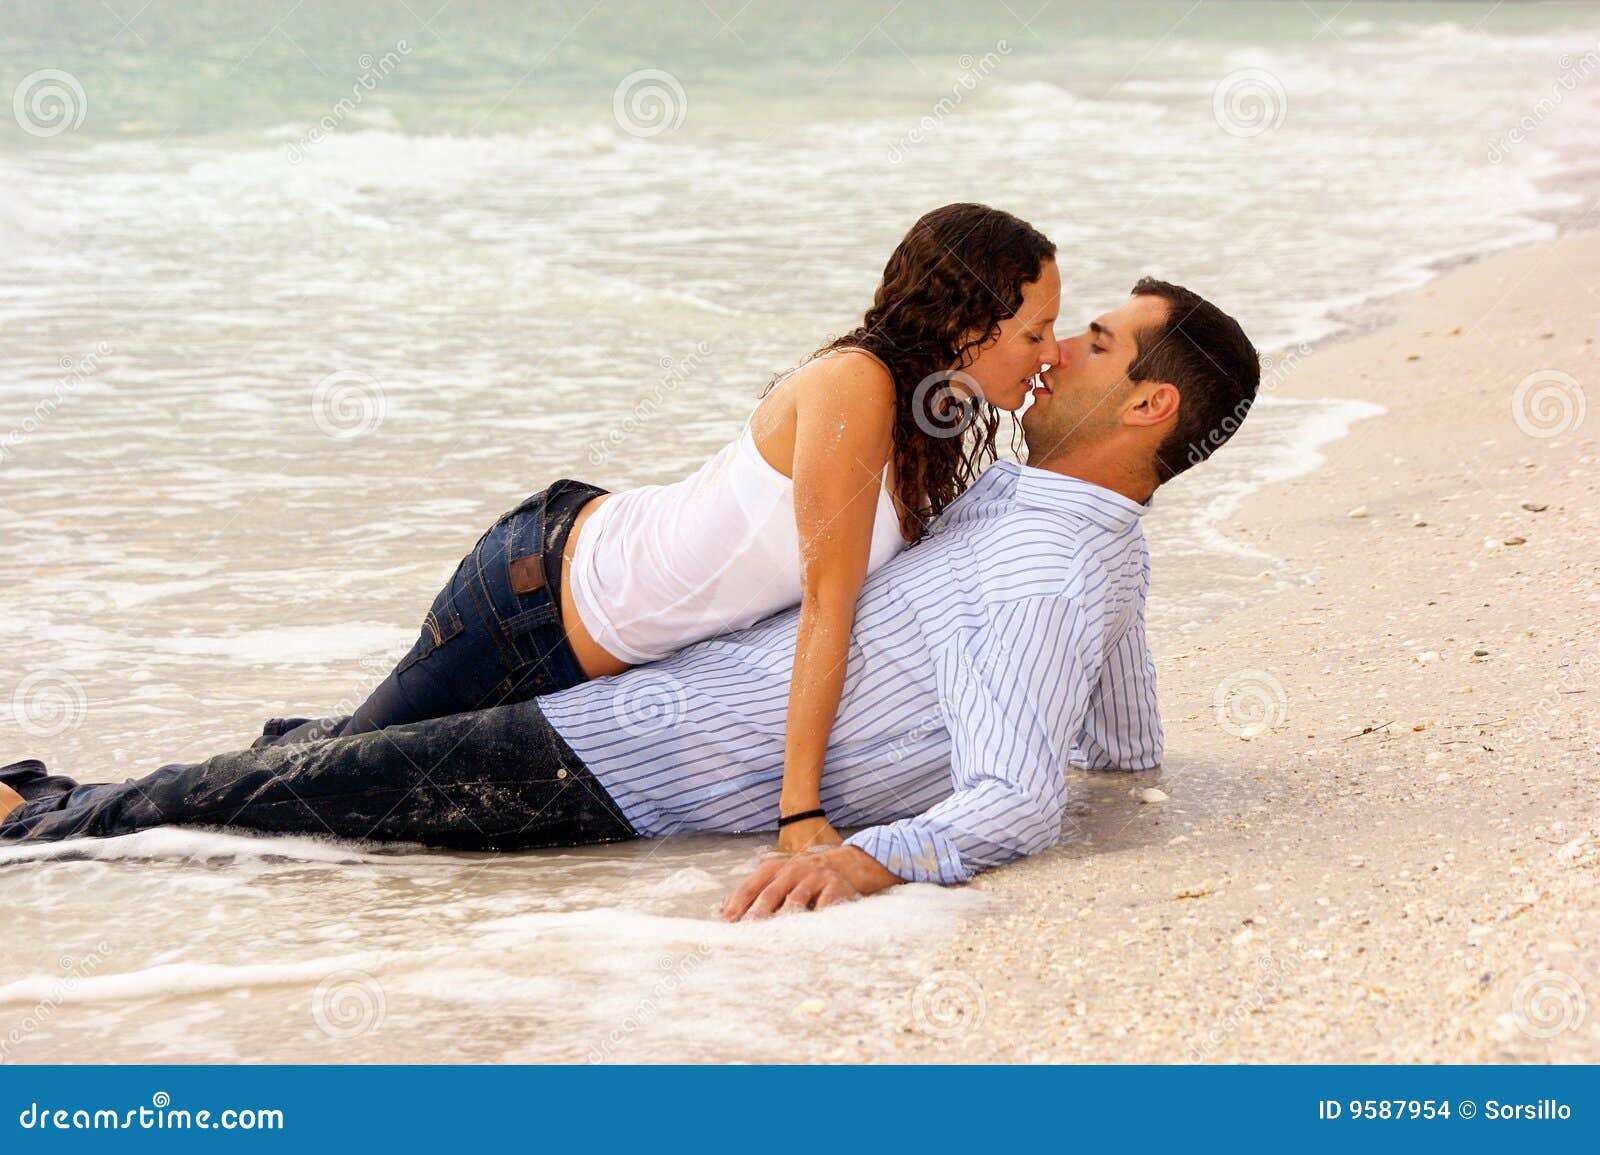 two lovers kissing at waters edge